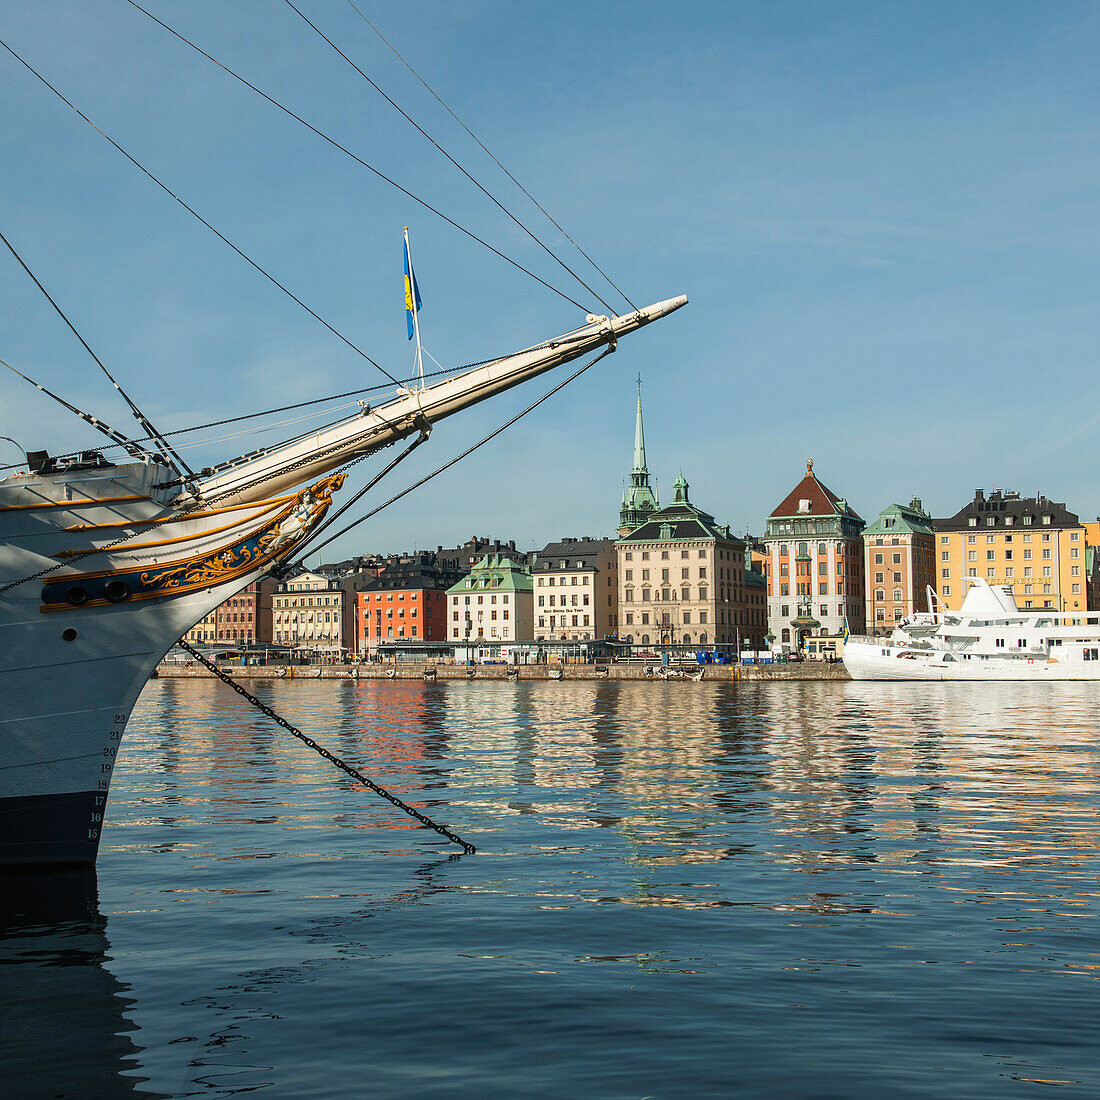 Boats In The Water And Buildings Along The Shoreline; Stockholm Sweden